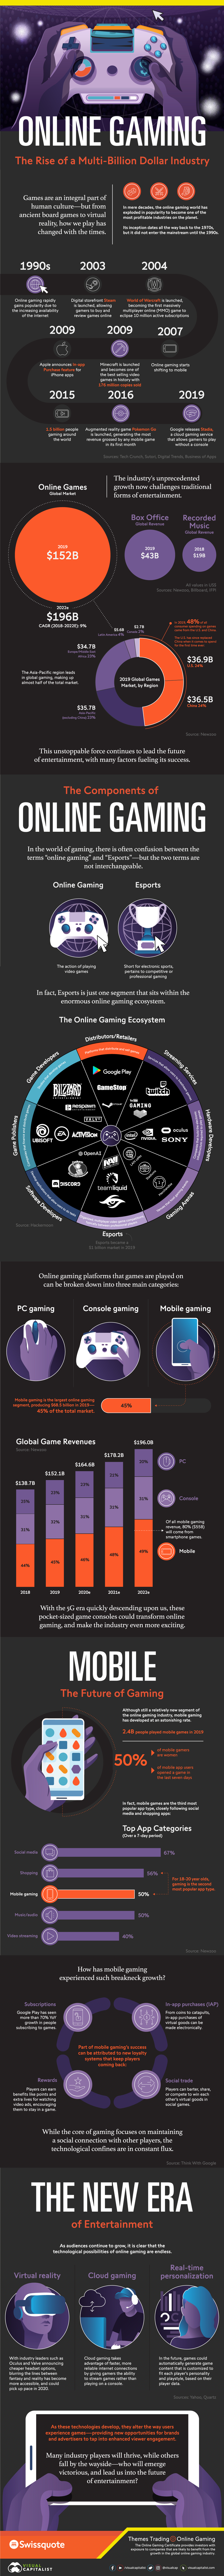 Cloud Gaming Europe 🎮 » Best Services for EU Gamers [2023]